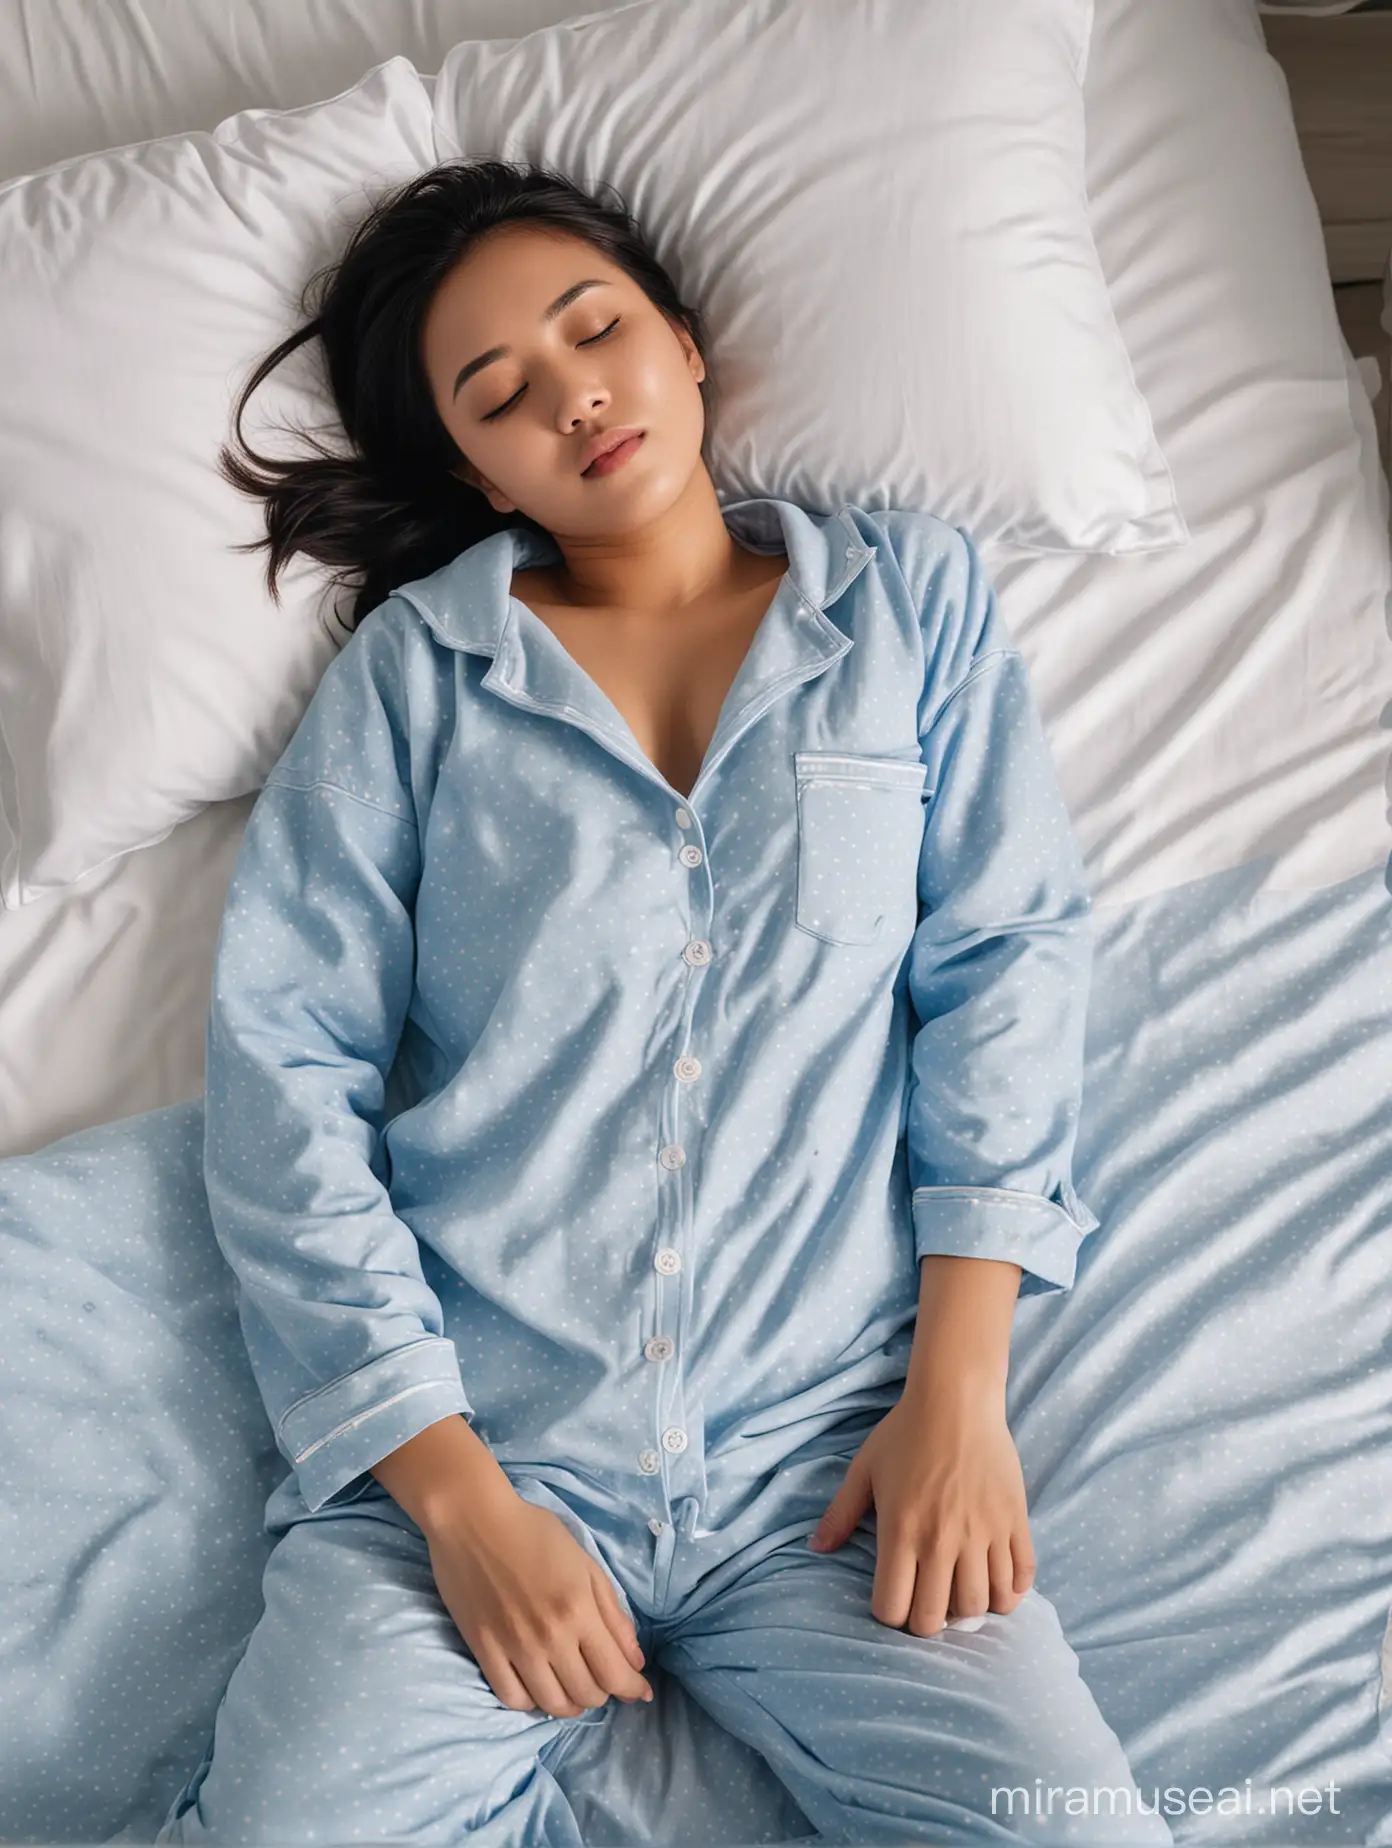 A 21yo Philippines woman is lying on its back on a white bed. Wearing blue pajamas. Closing eyes. Huge breasts. Fullbody.